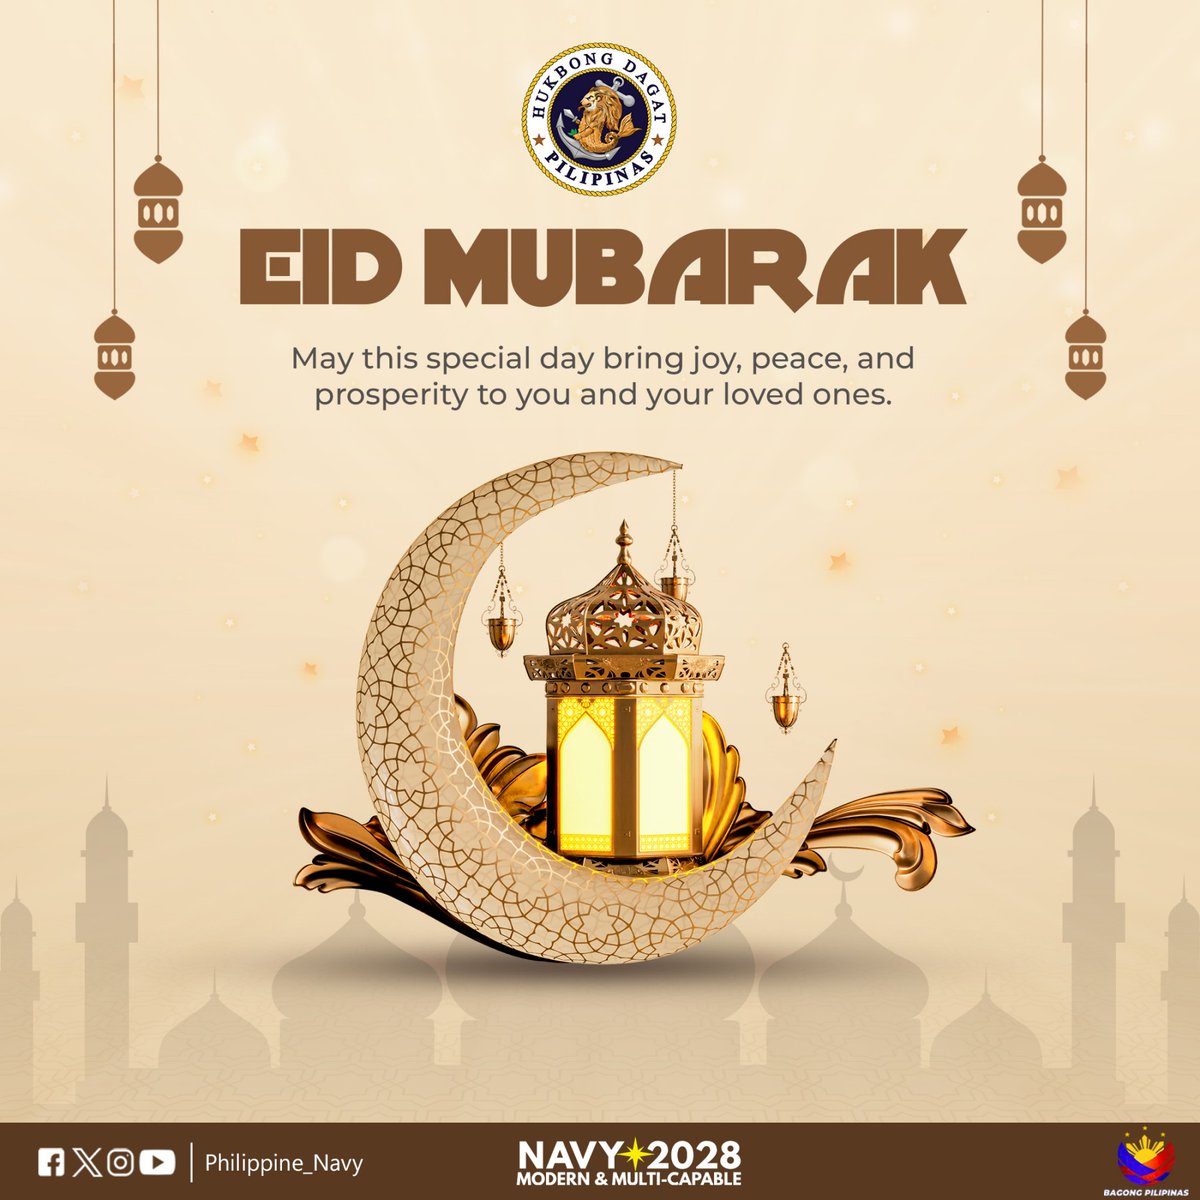 The Philippine Navy stands in solidarity with our Muslim brothers and sisters as we celebrate the end of Ramadan. May this Eid bring abundant happiness and success to everyone's lives. Eid Mubarak! 🌙 #ModernandMultiCapablePHNavy #AFPyoucanTRUST